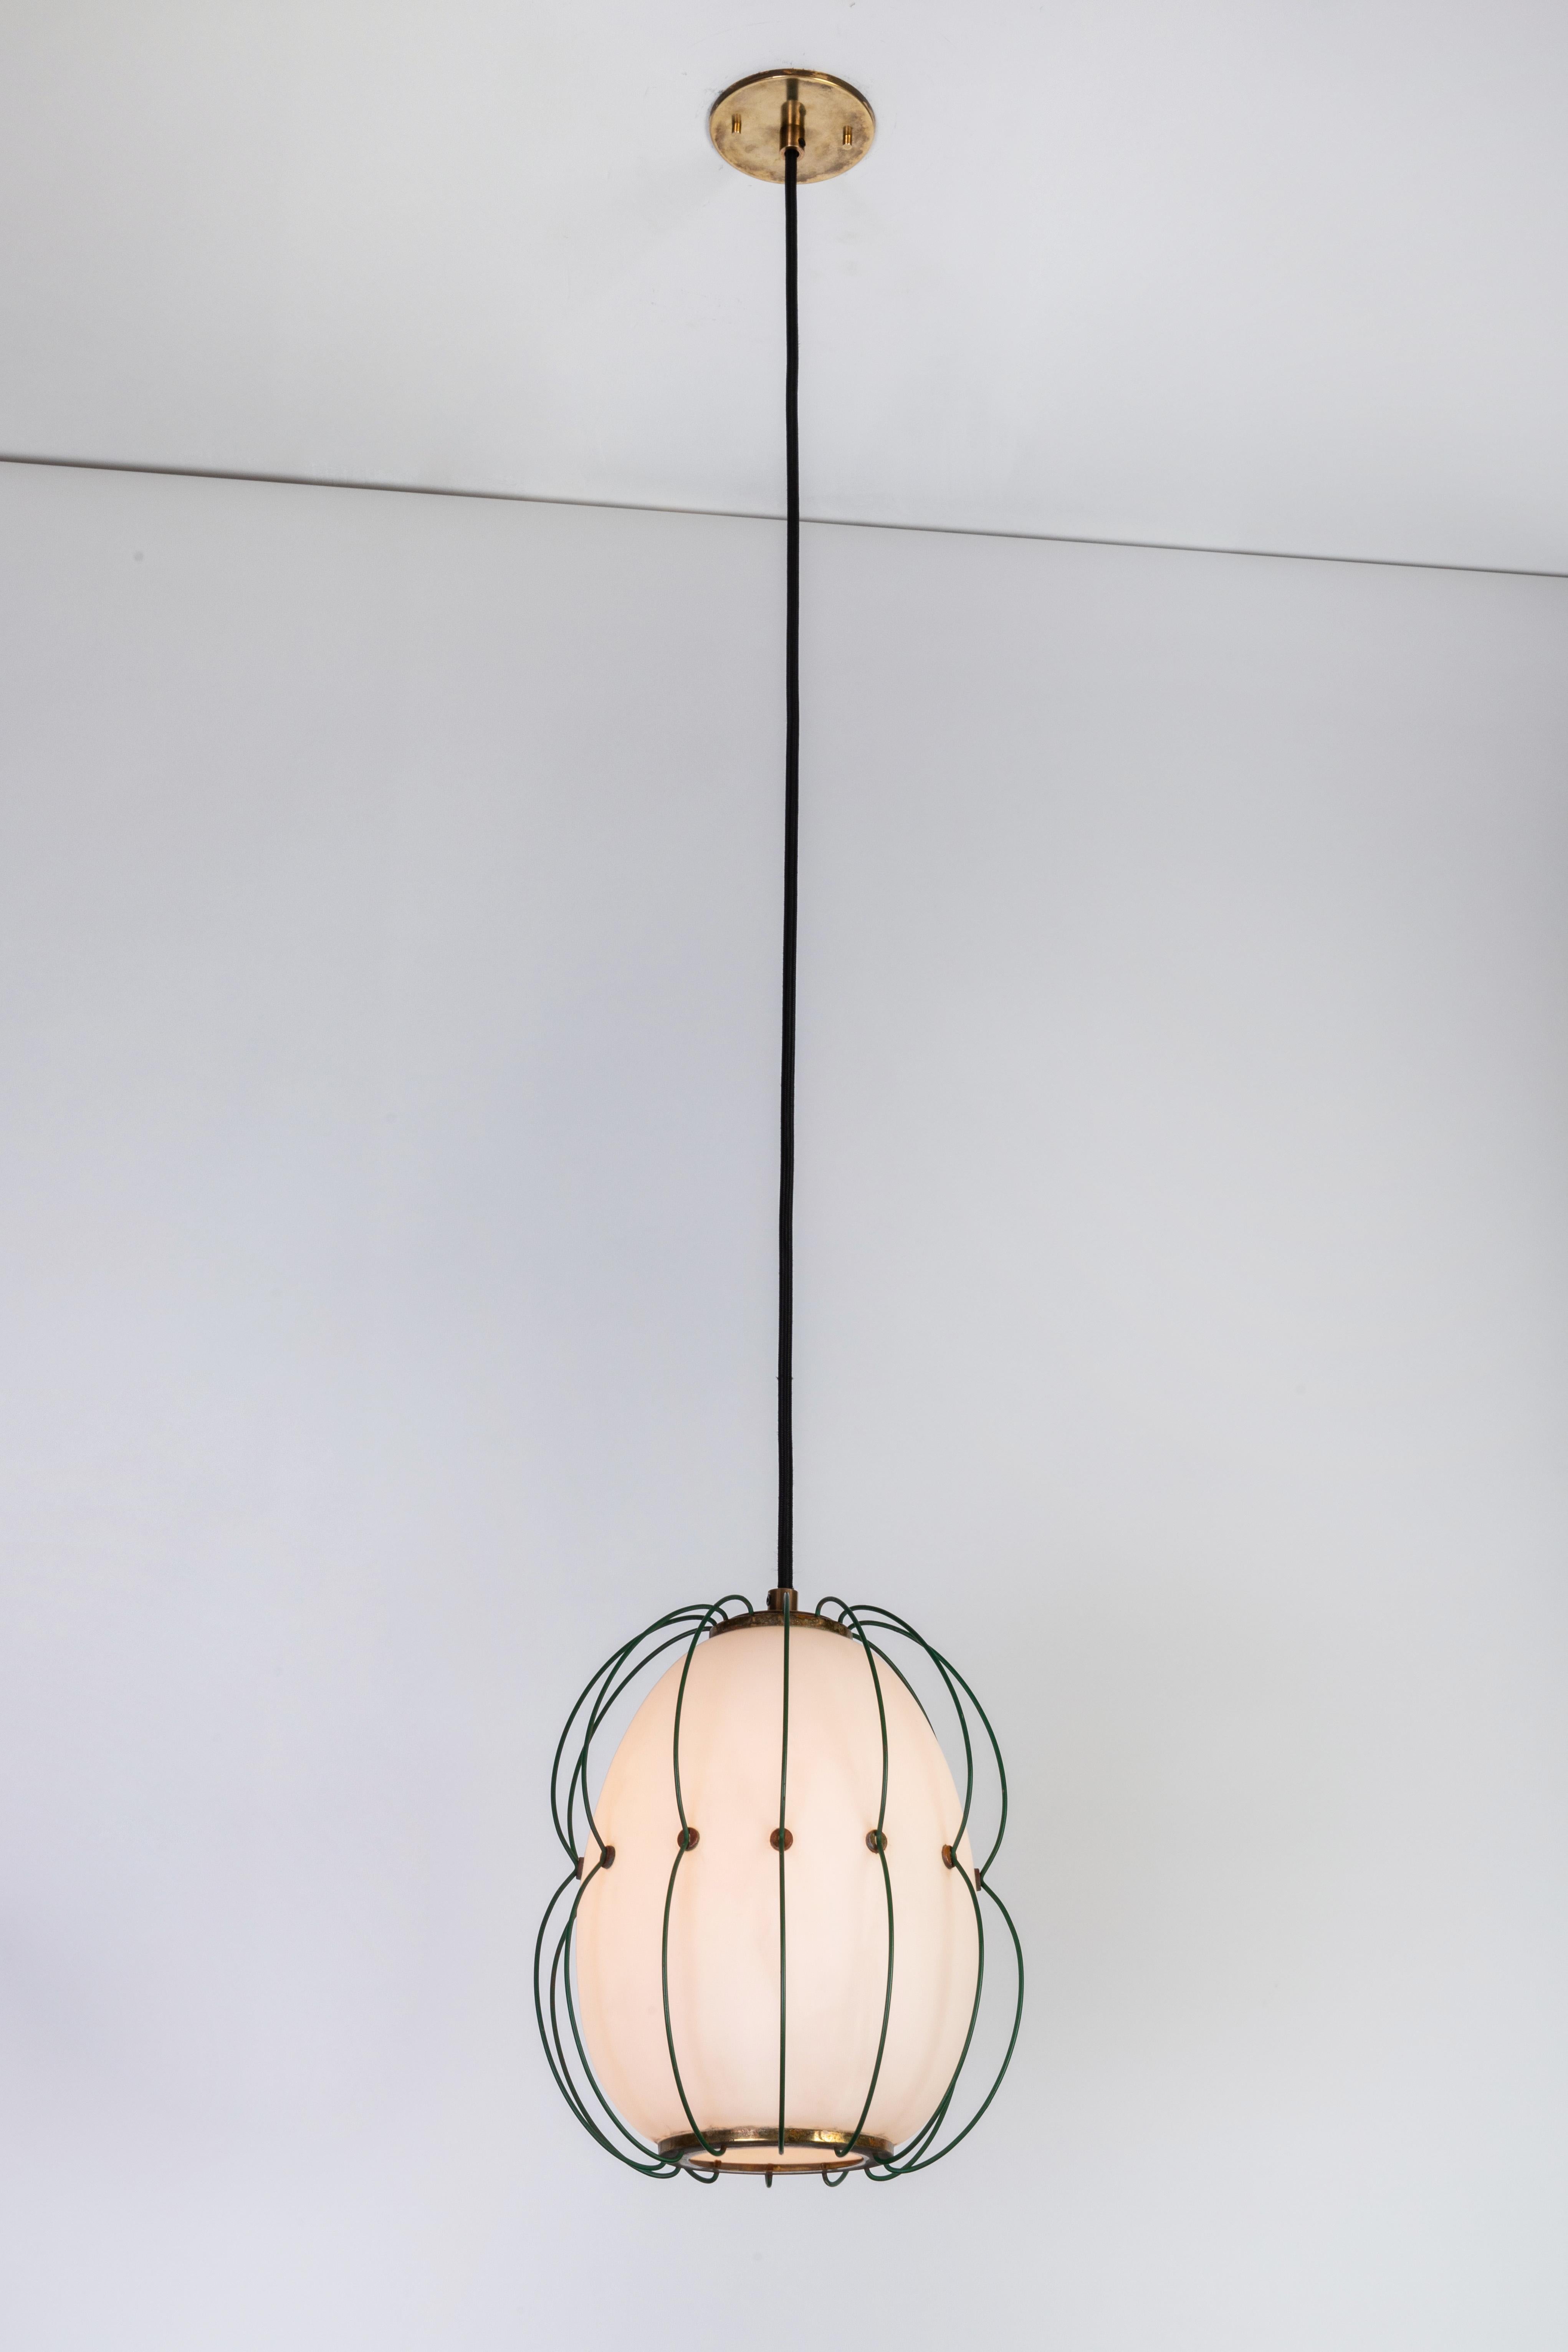 Painted 1950s Suspension Light Attributed to Angelo Lelli for Arredoluce